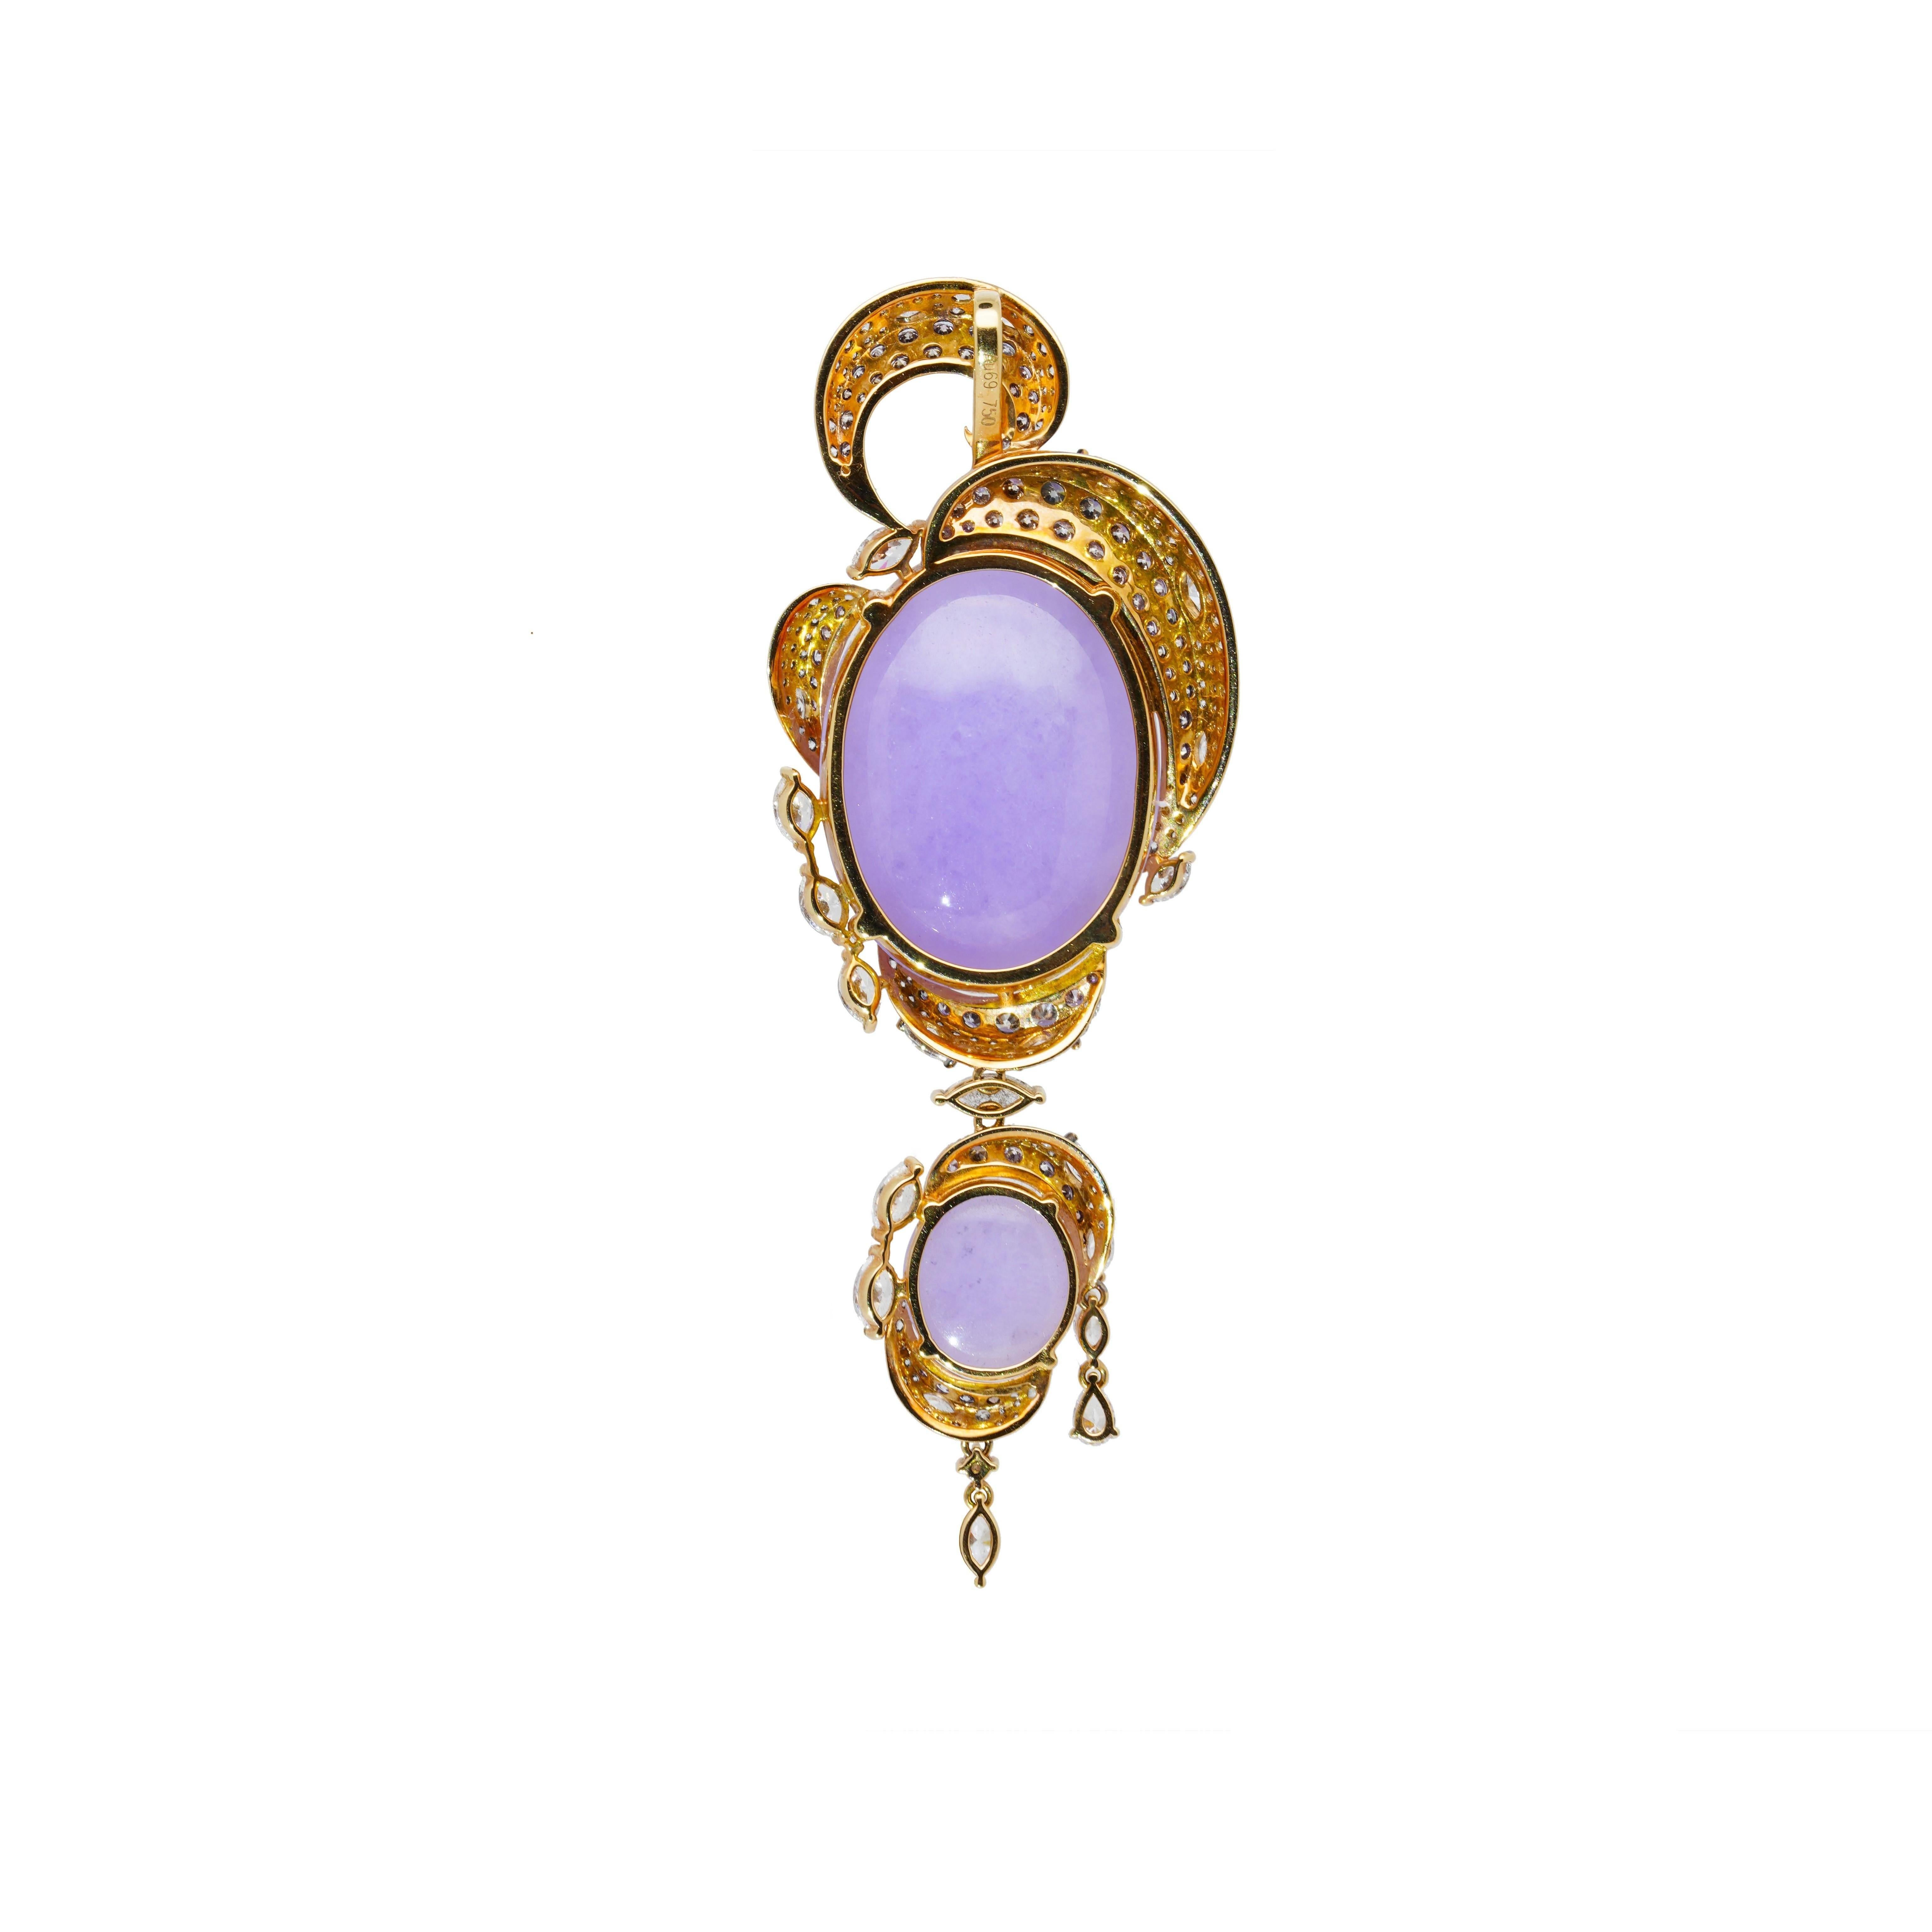 The Purplish Syzygy Pendant from 'The Garden of Myth Collection' by Austy Lee. This magnificent piece consists of Burmese Purple Jadeites (Type A), Pear-Shaped, Marquise-Cut and Round Brilliant-Cut Diamonds, set on purple color-plated 18K Yellow